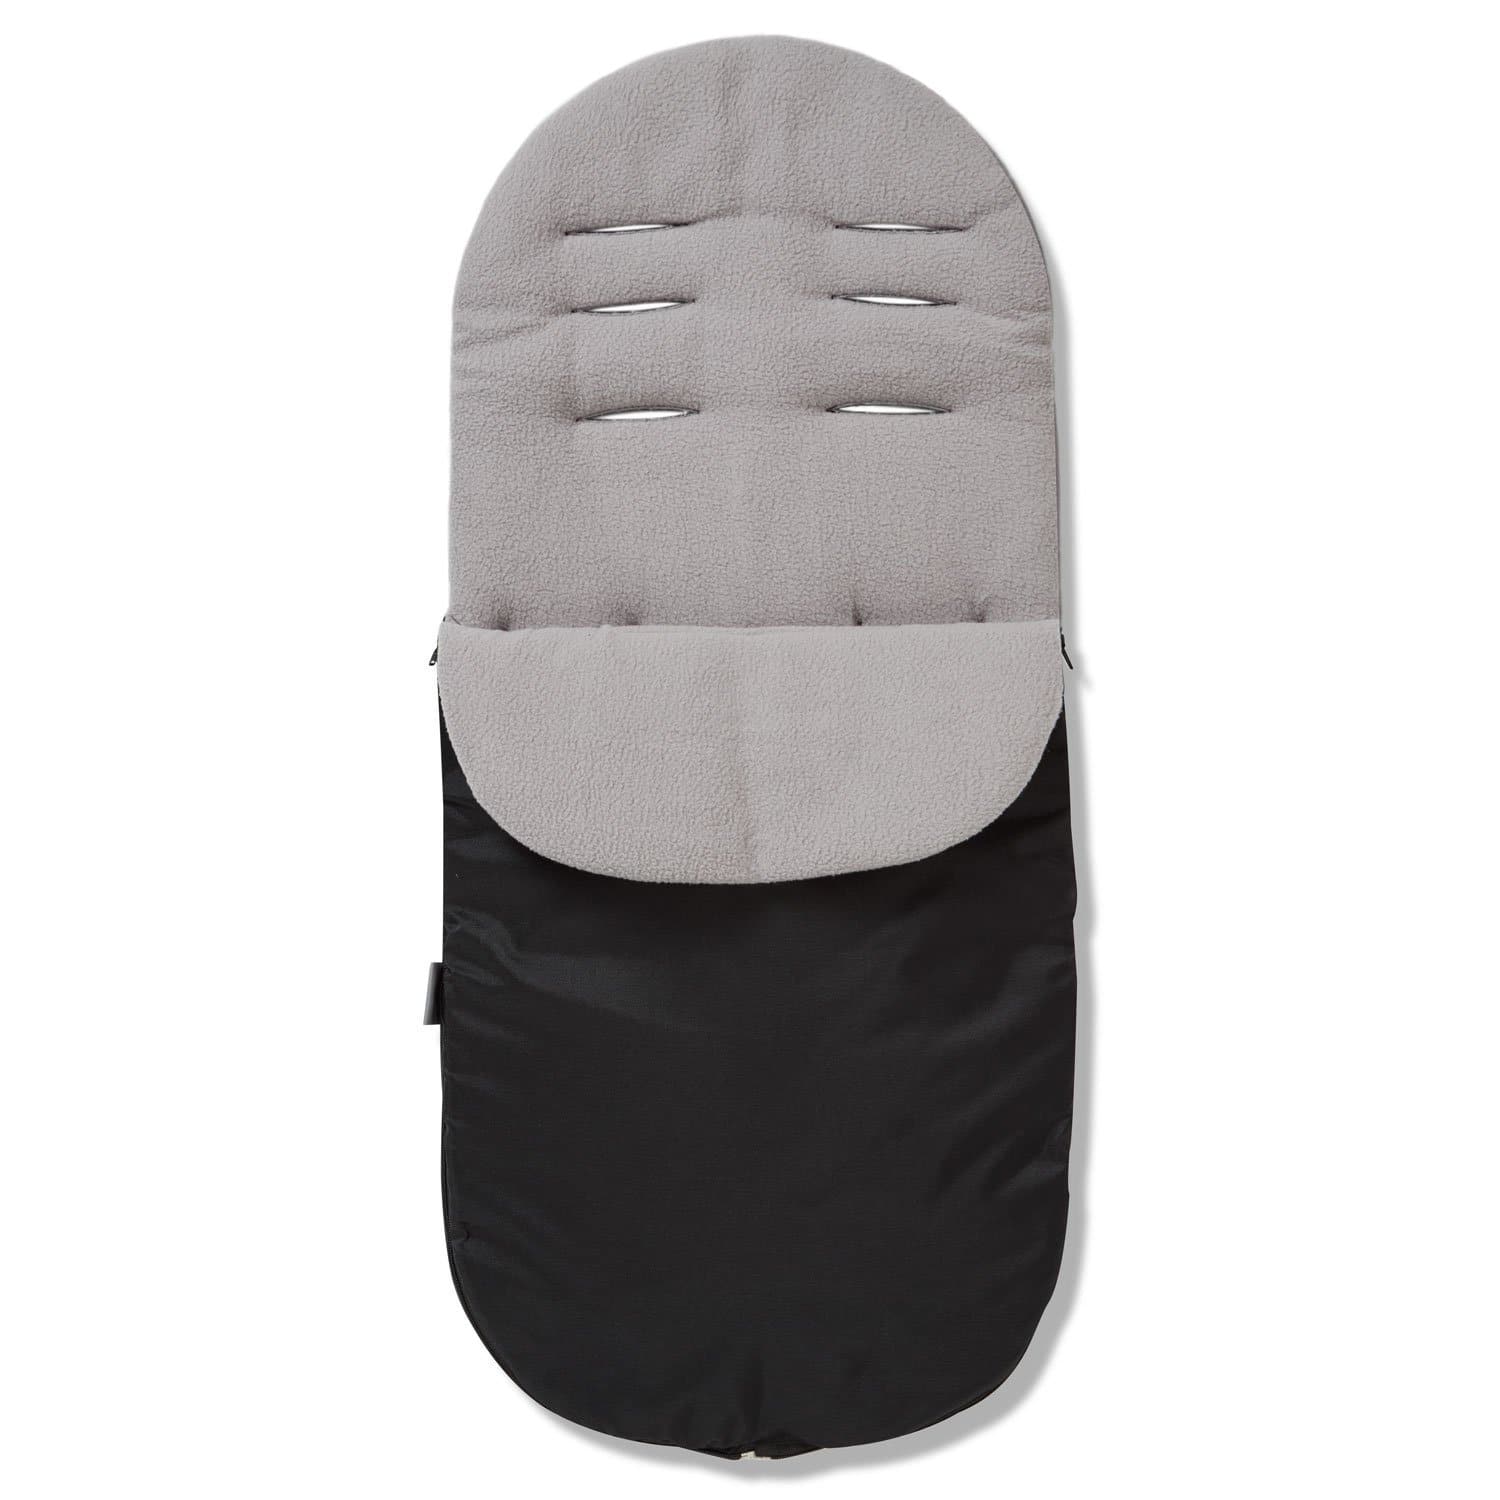 Footmuff / Cosy Toes Compatible with Babyzen - Grey / Fits All Models | For Your Little One